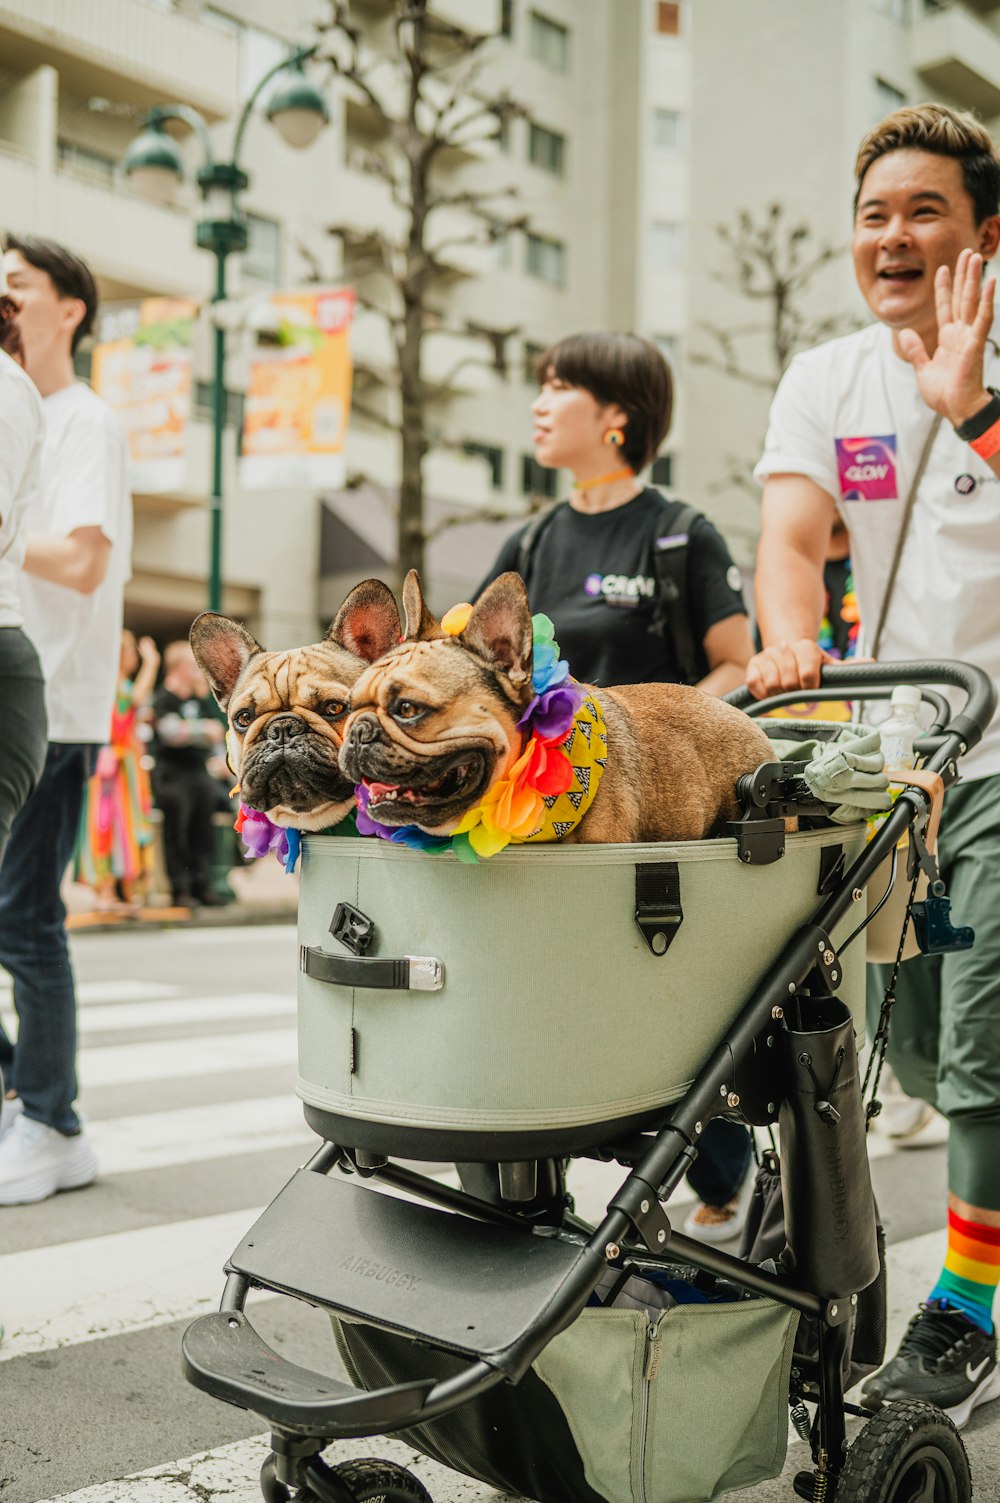 a dog in a stroller on a city street